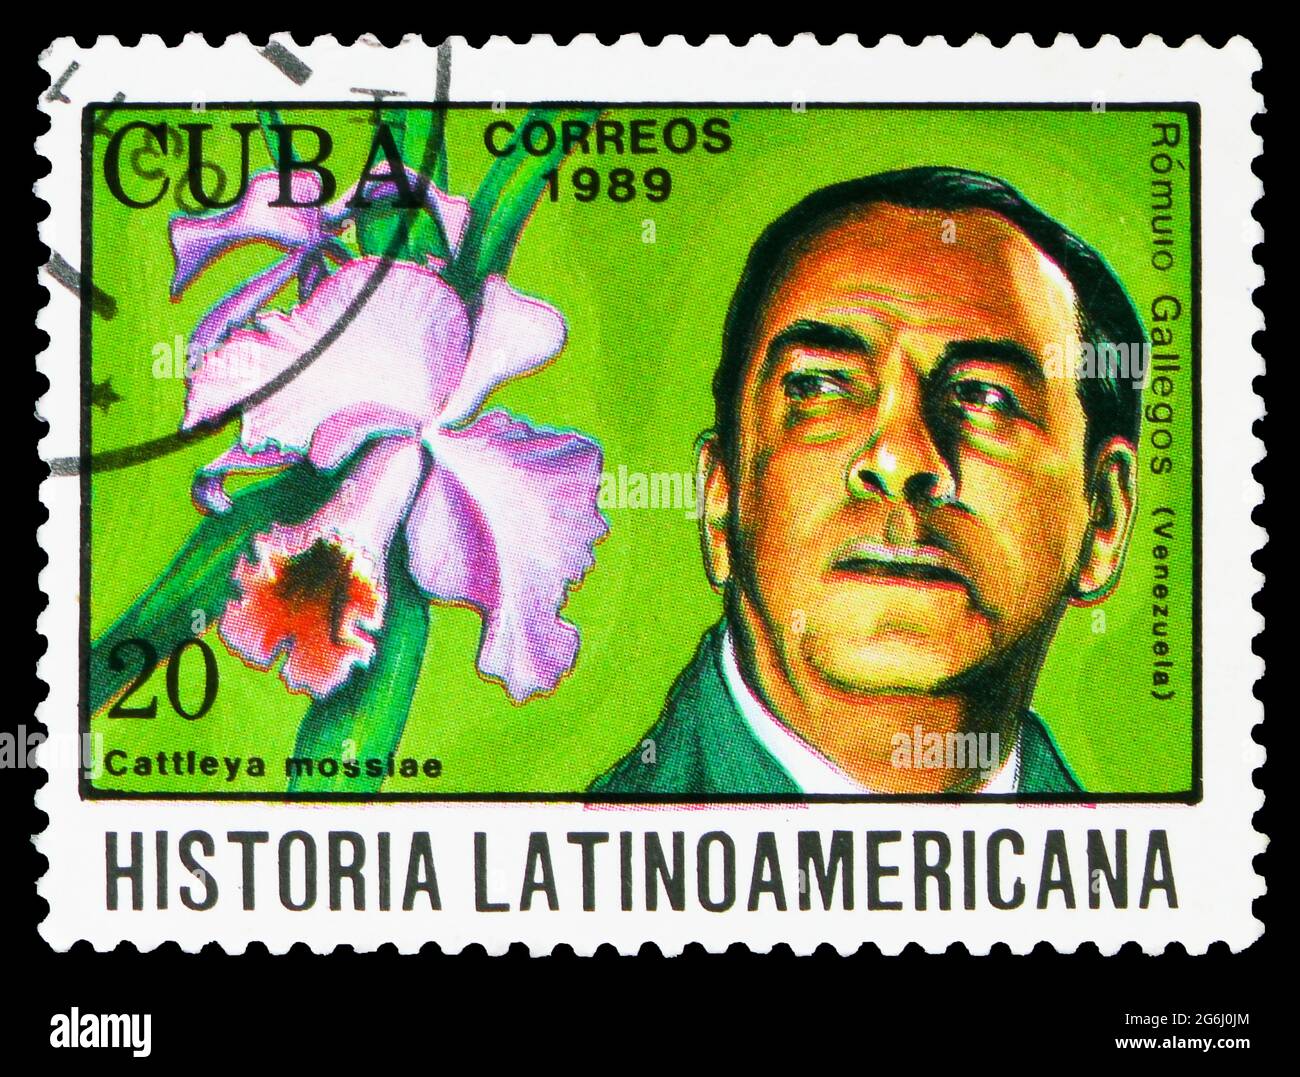 MOSCOW, RUSSIA - MARCH 21, 2020: Postage stamp printed in Cuba shows Romulo Gallegos, Latin american history serie, circa 1989 Stock Photo